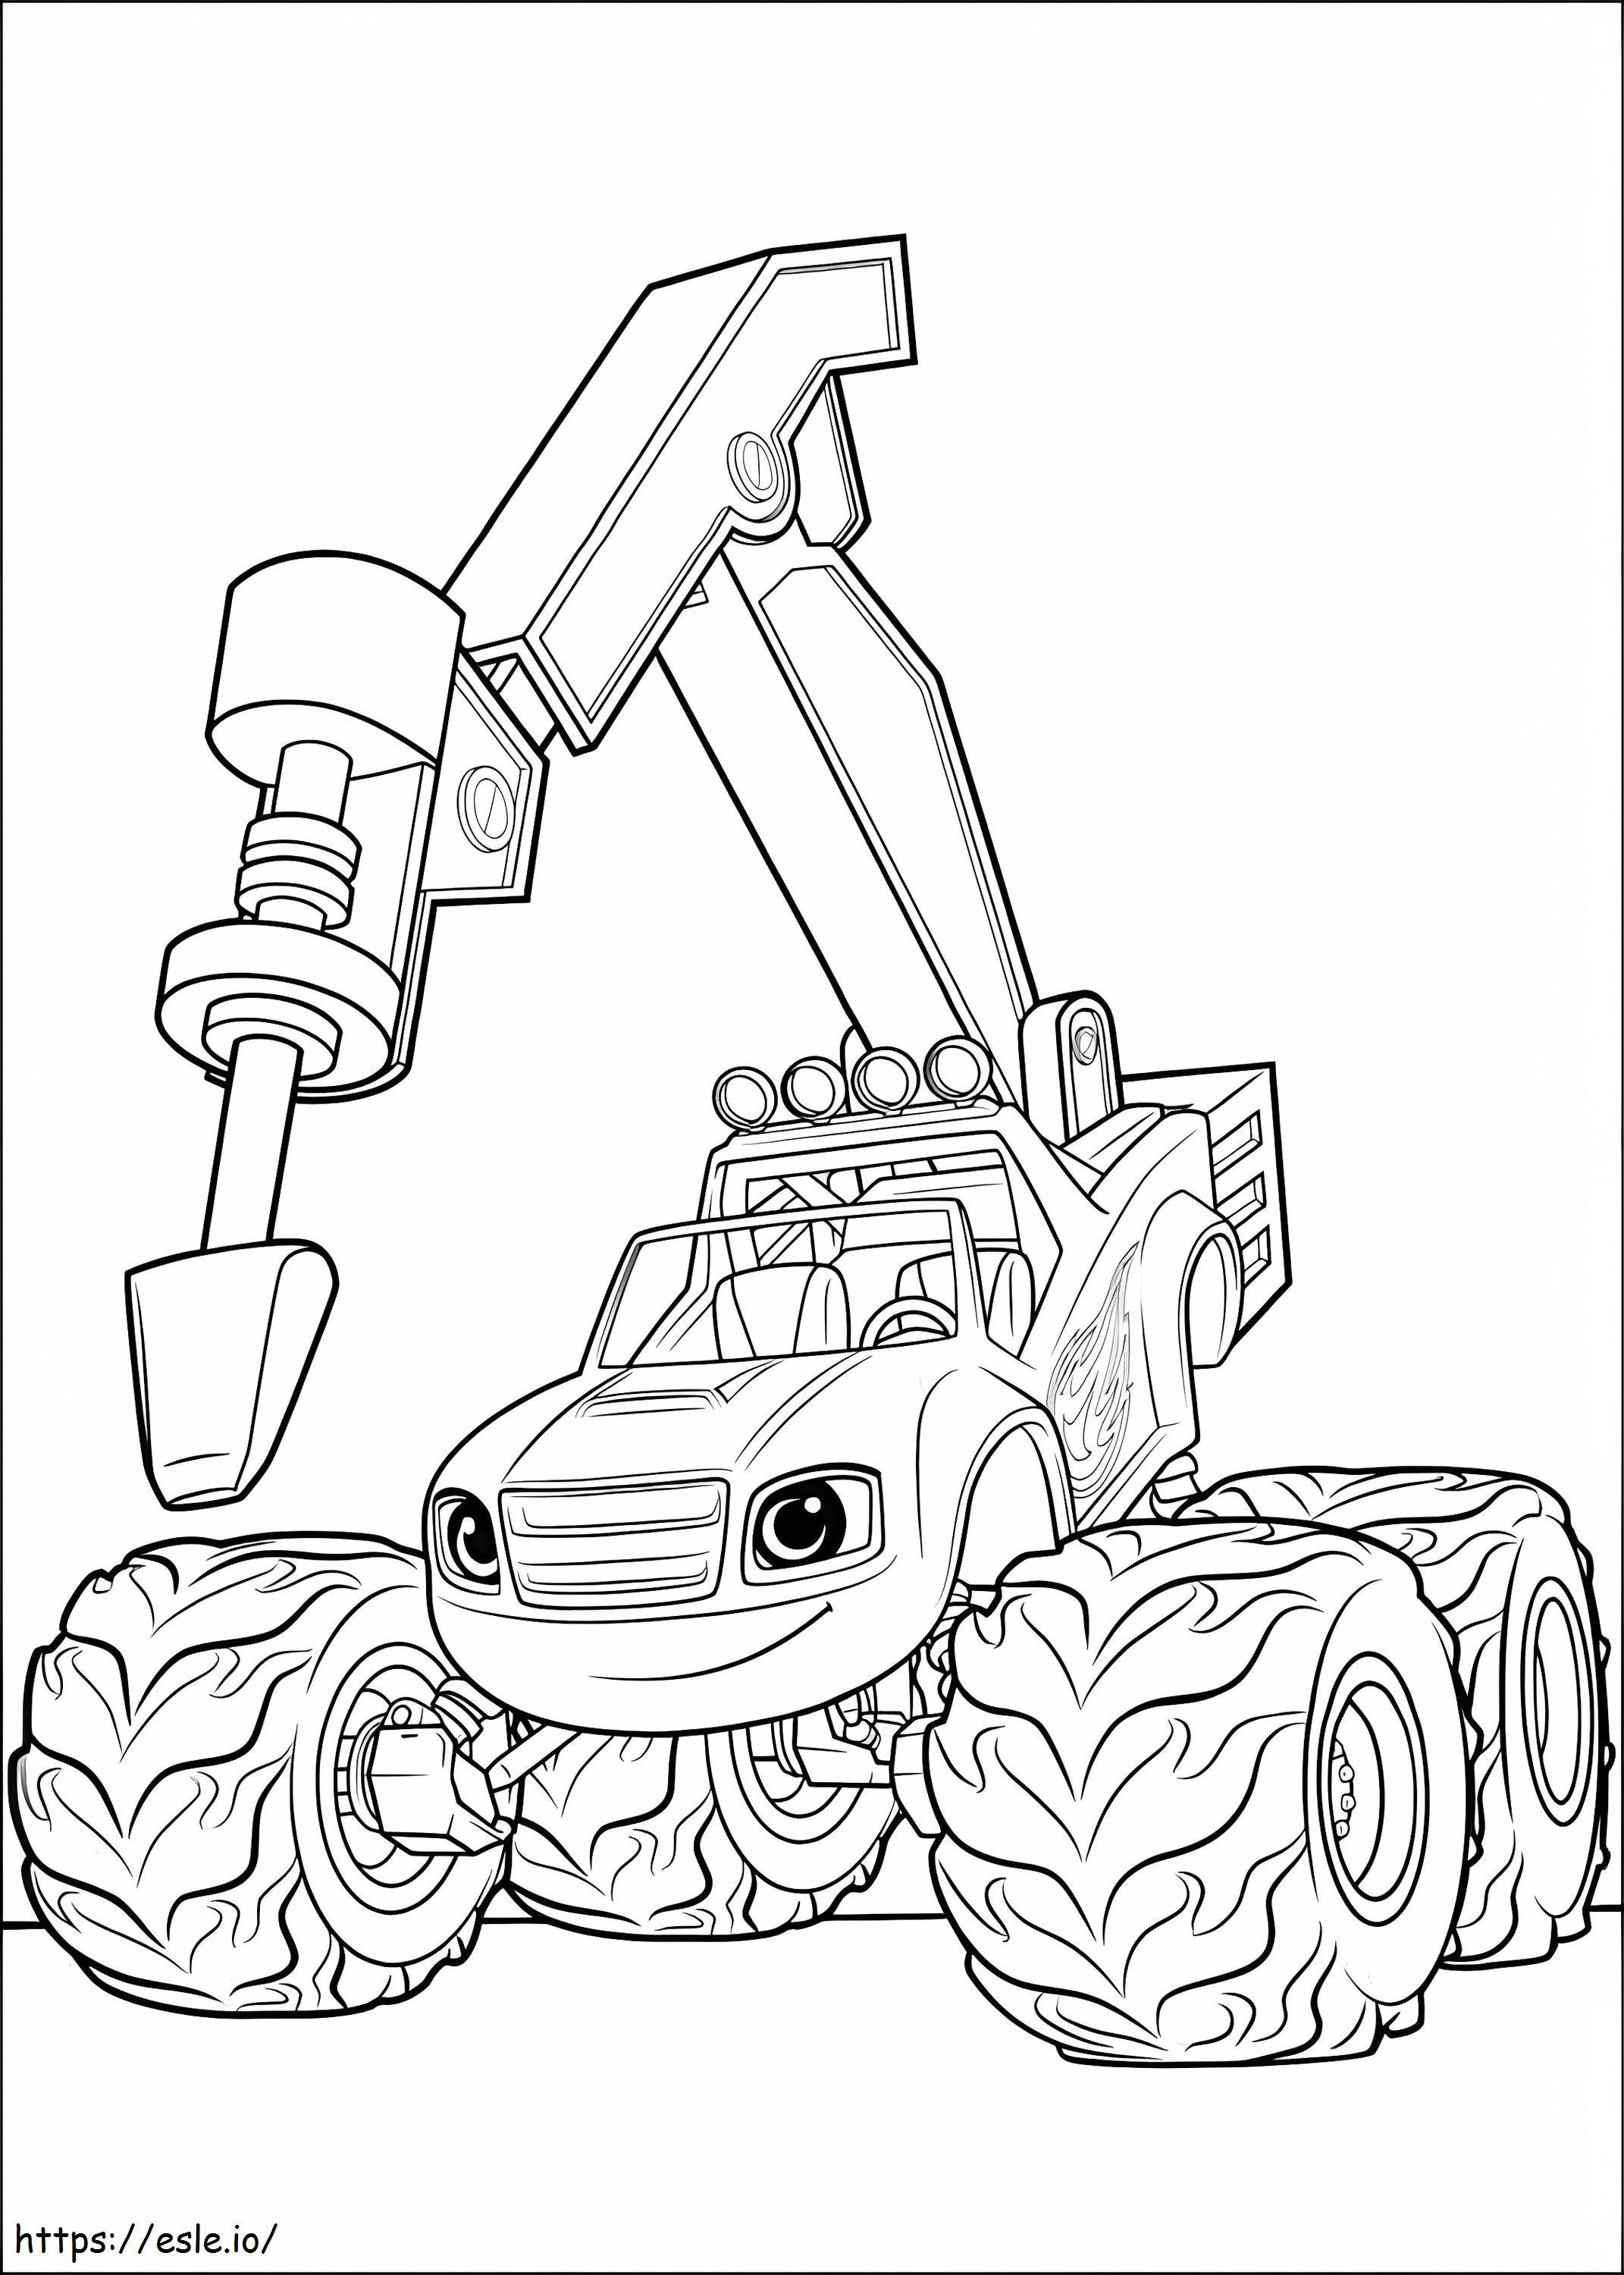 Smiling Blaze And The Monster Machines coloring page